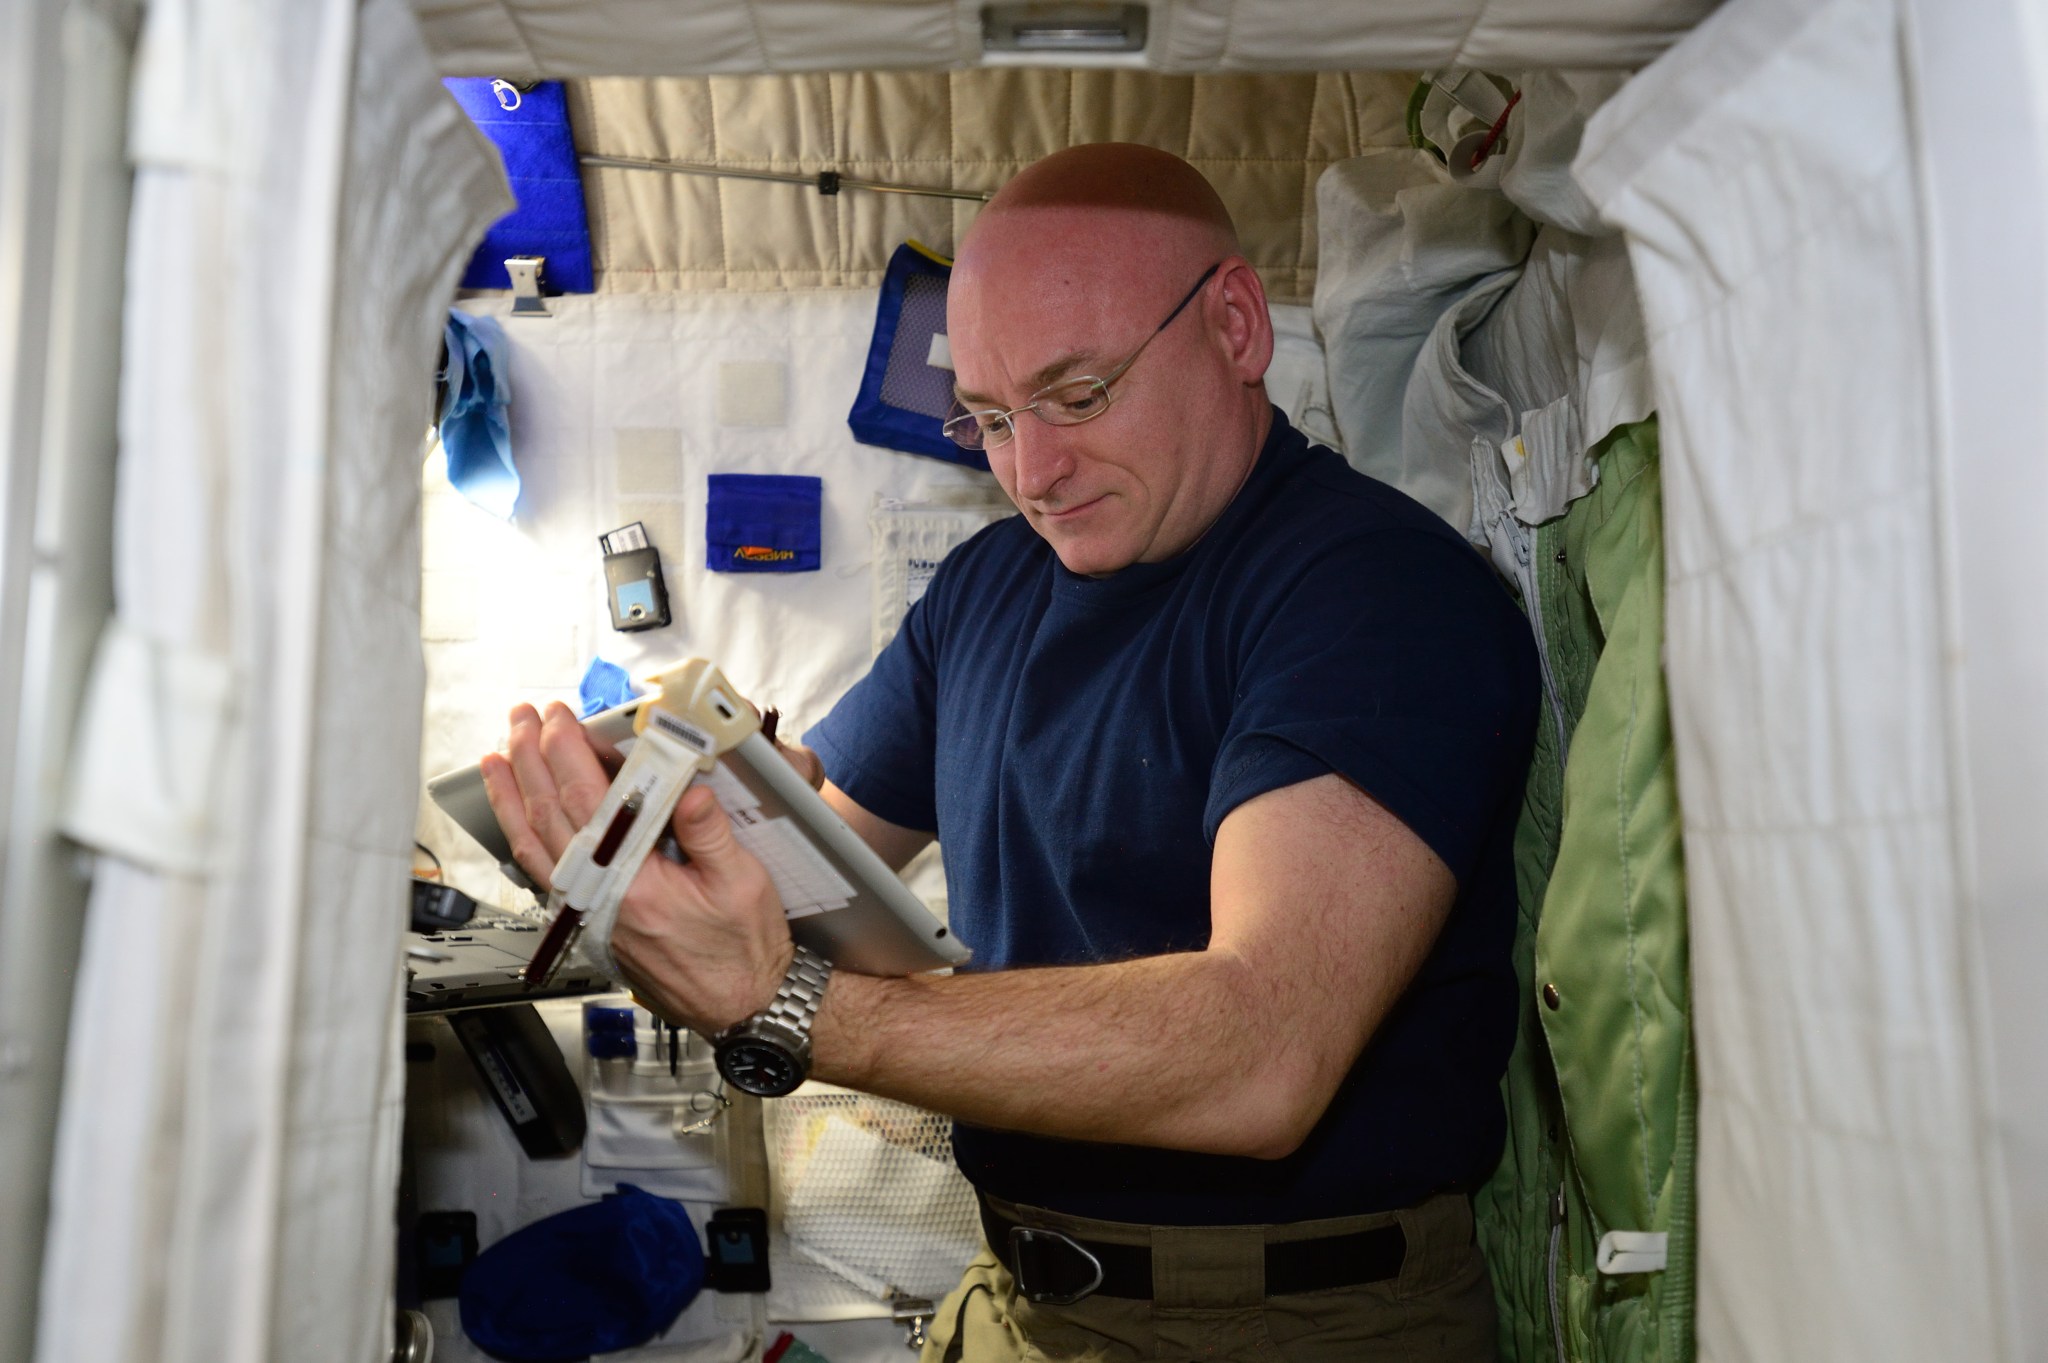 NASA Astronaut Scott Kelly performs the Fine Motor Skills Test as part of his One-Year Mission. This task tests Kelly’s ability 